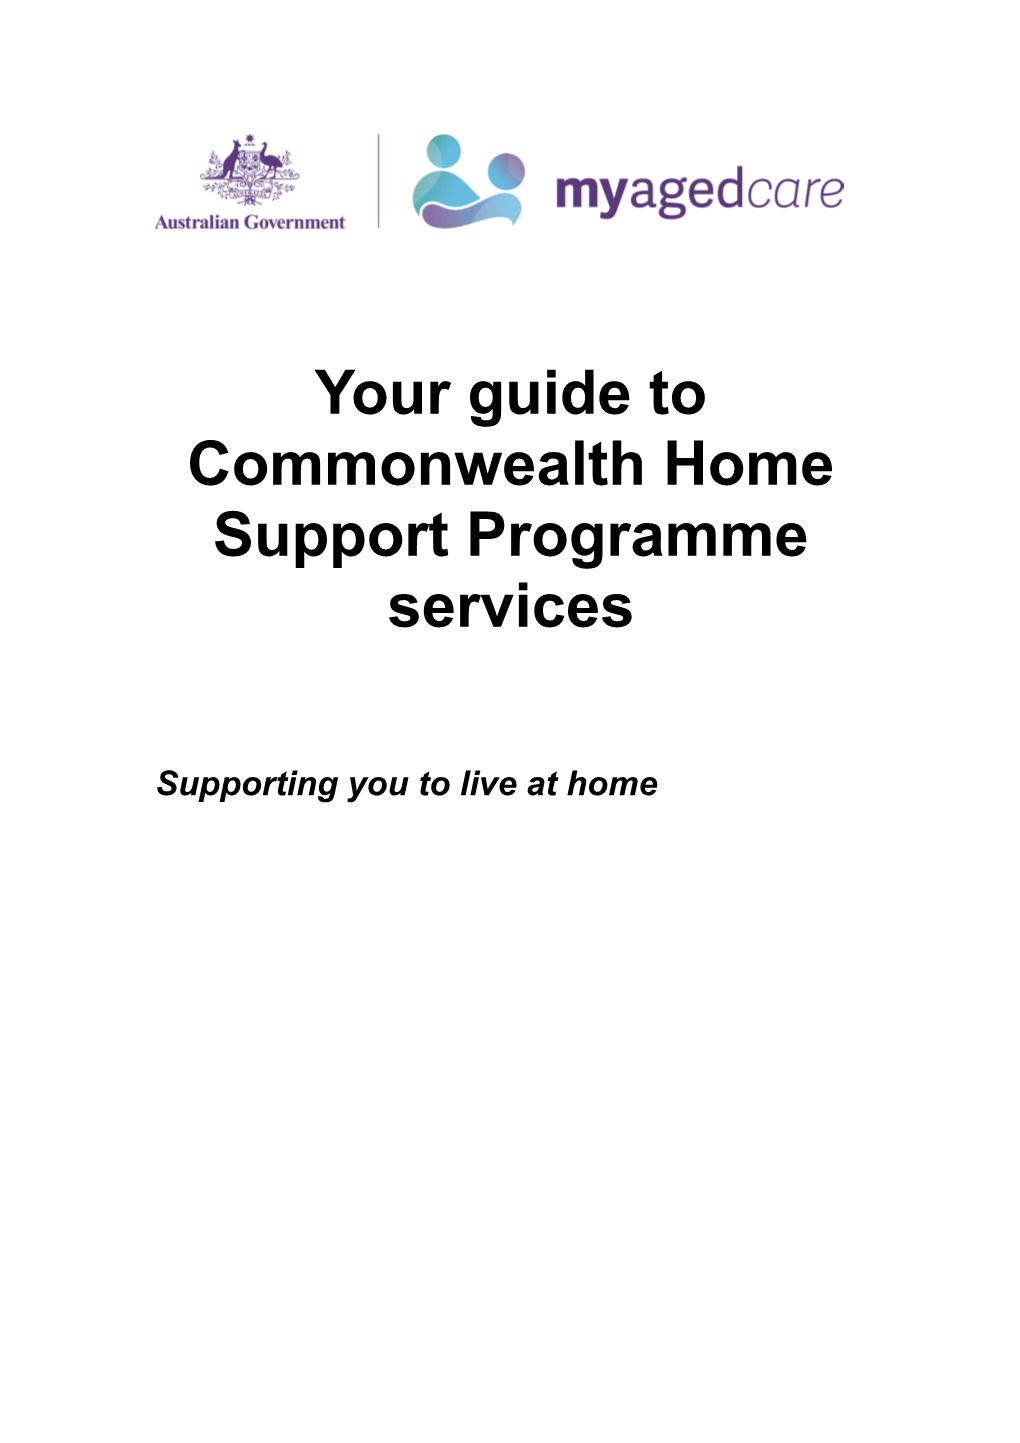 Your Guide to Commonwealth Home Support Programme Services